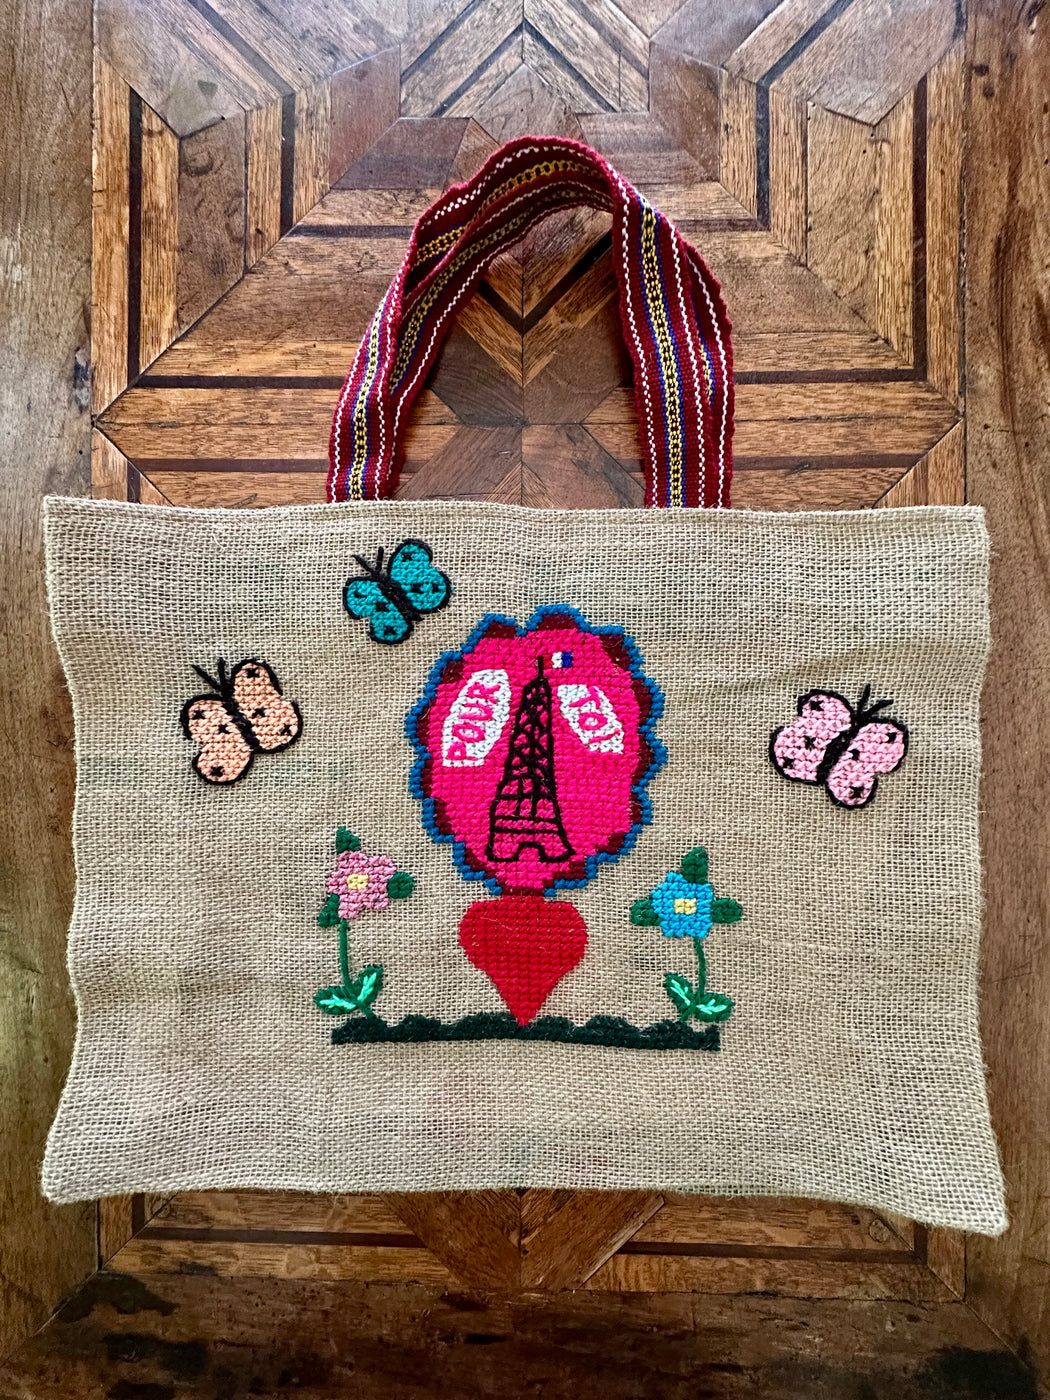 Nathalie Lete "Pour Toi" Hand-Embroidered Tote